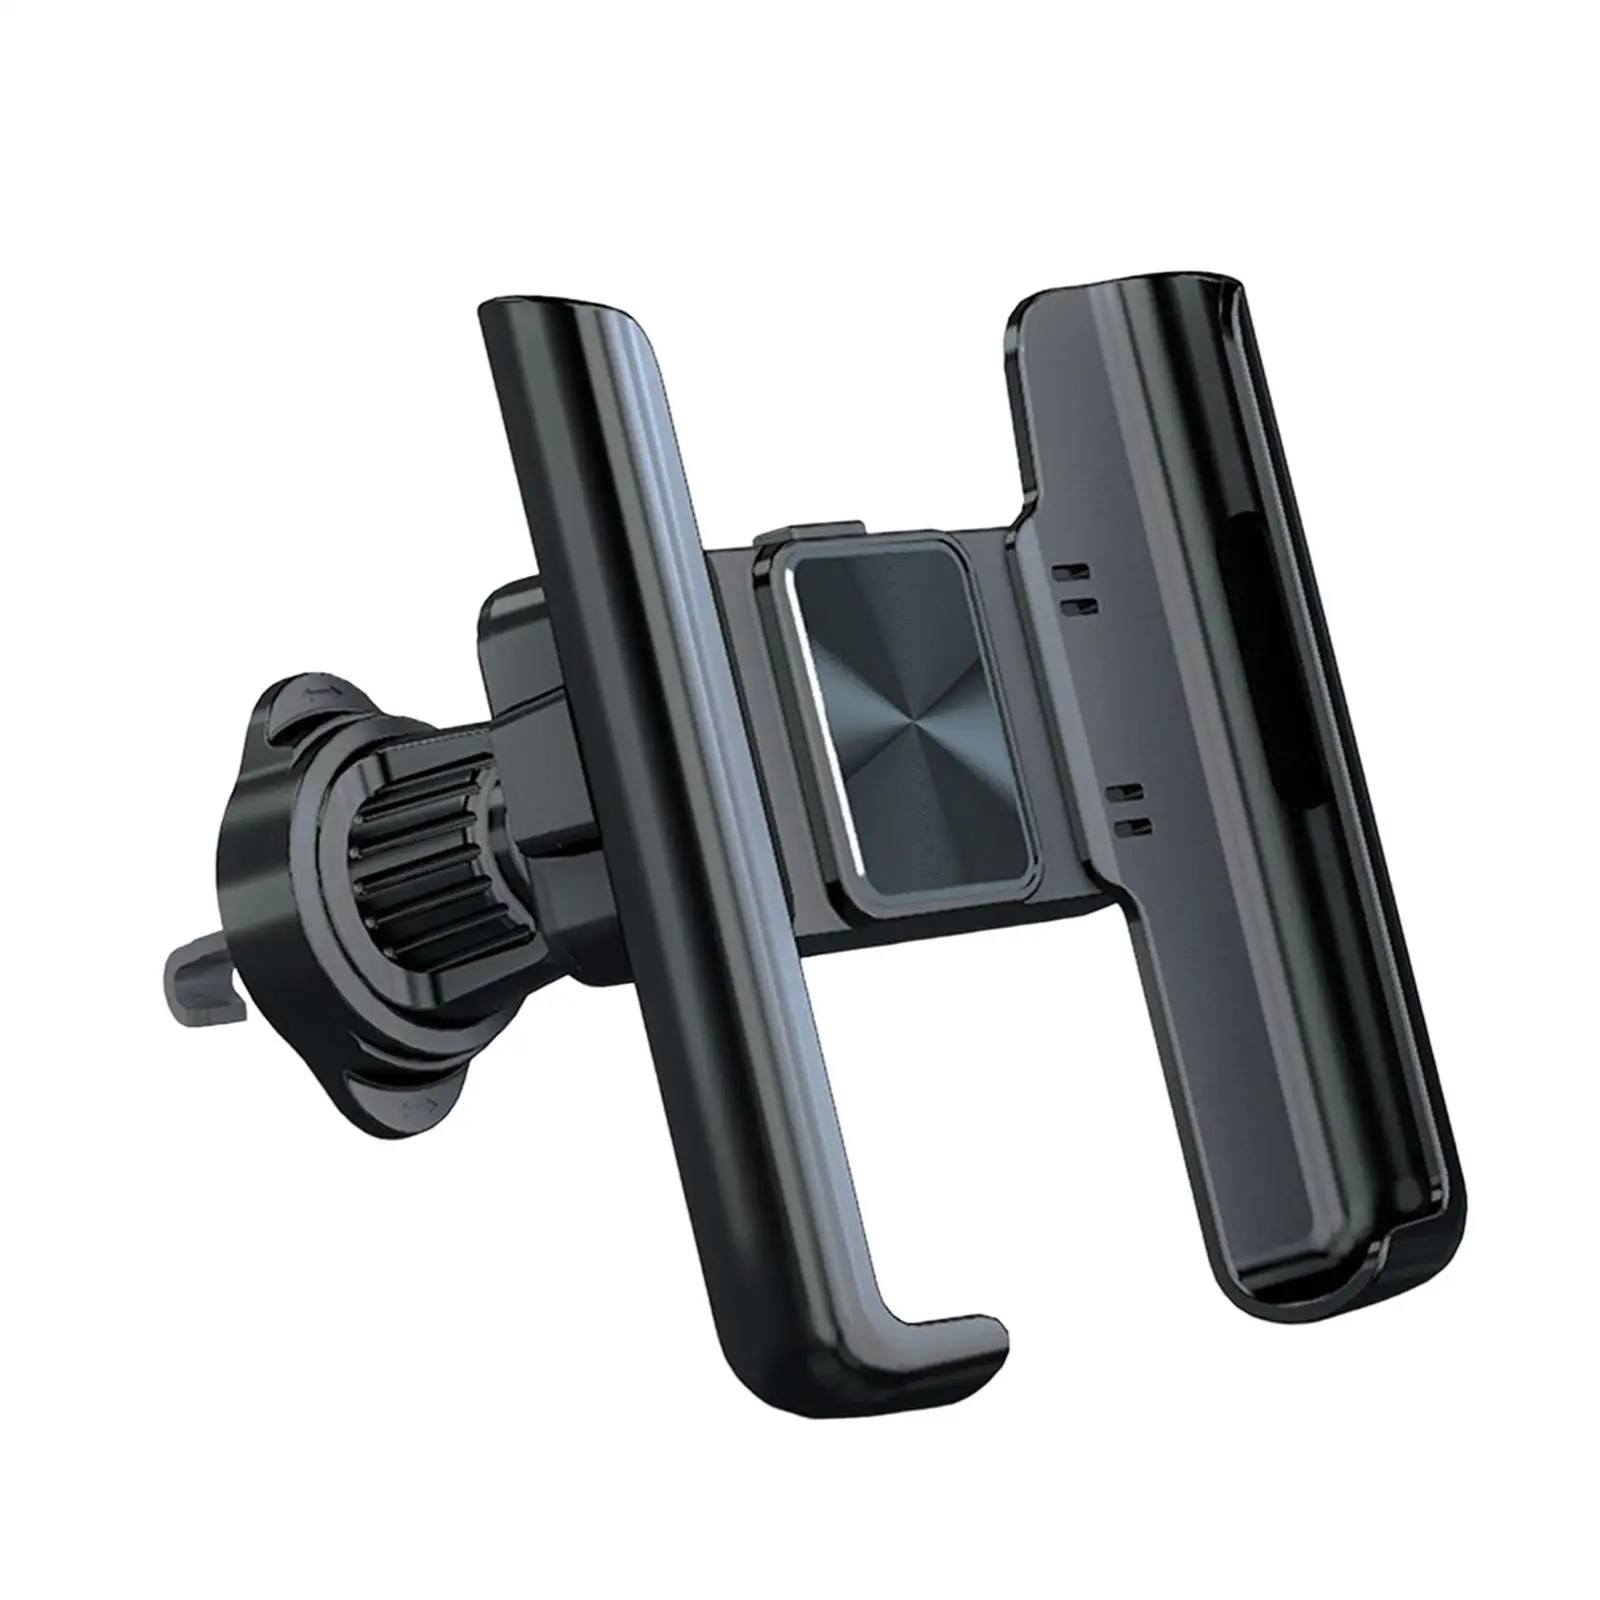 Air Vent Car Smartphone Holder 360 Rotatable for Most Phones Durable Adjustable Angle Auto Support Bracket for Trucks SUV